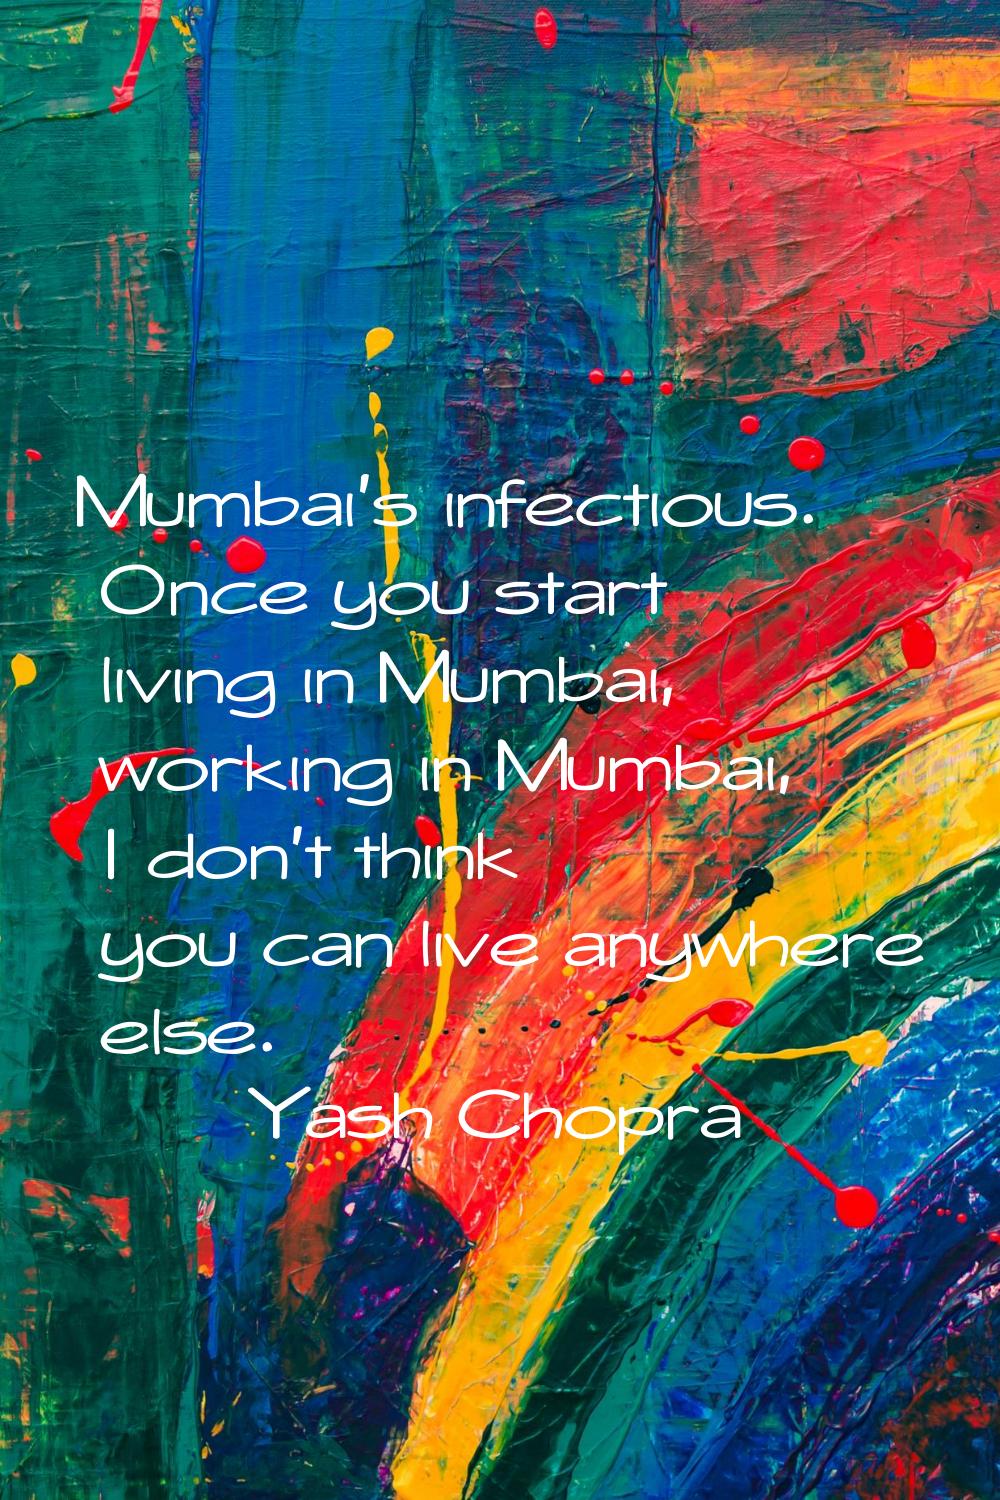 Mumbai's infectious. Once you start living in Mumbai, working in Mumbai, I don't think you can live